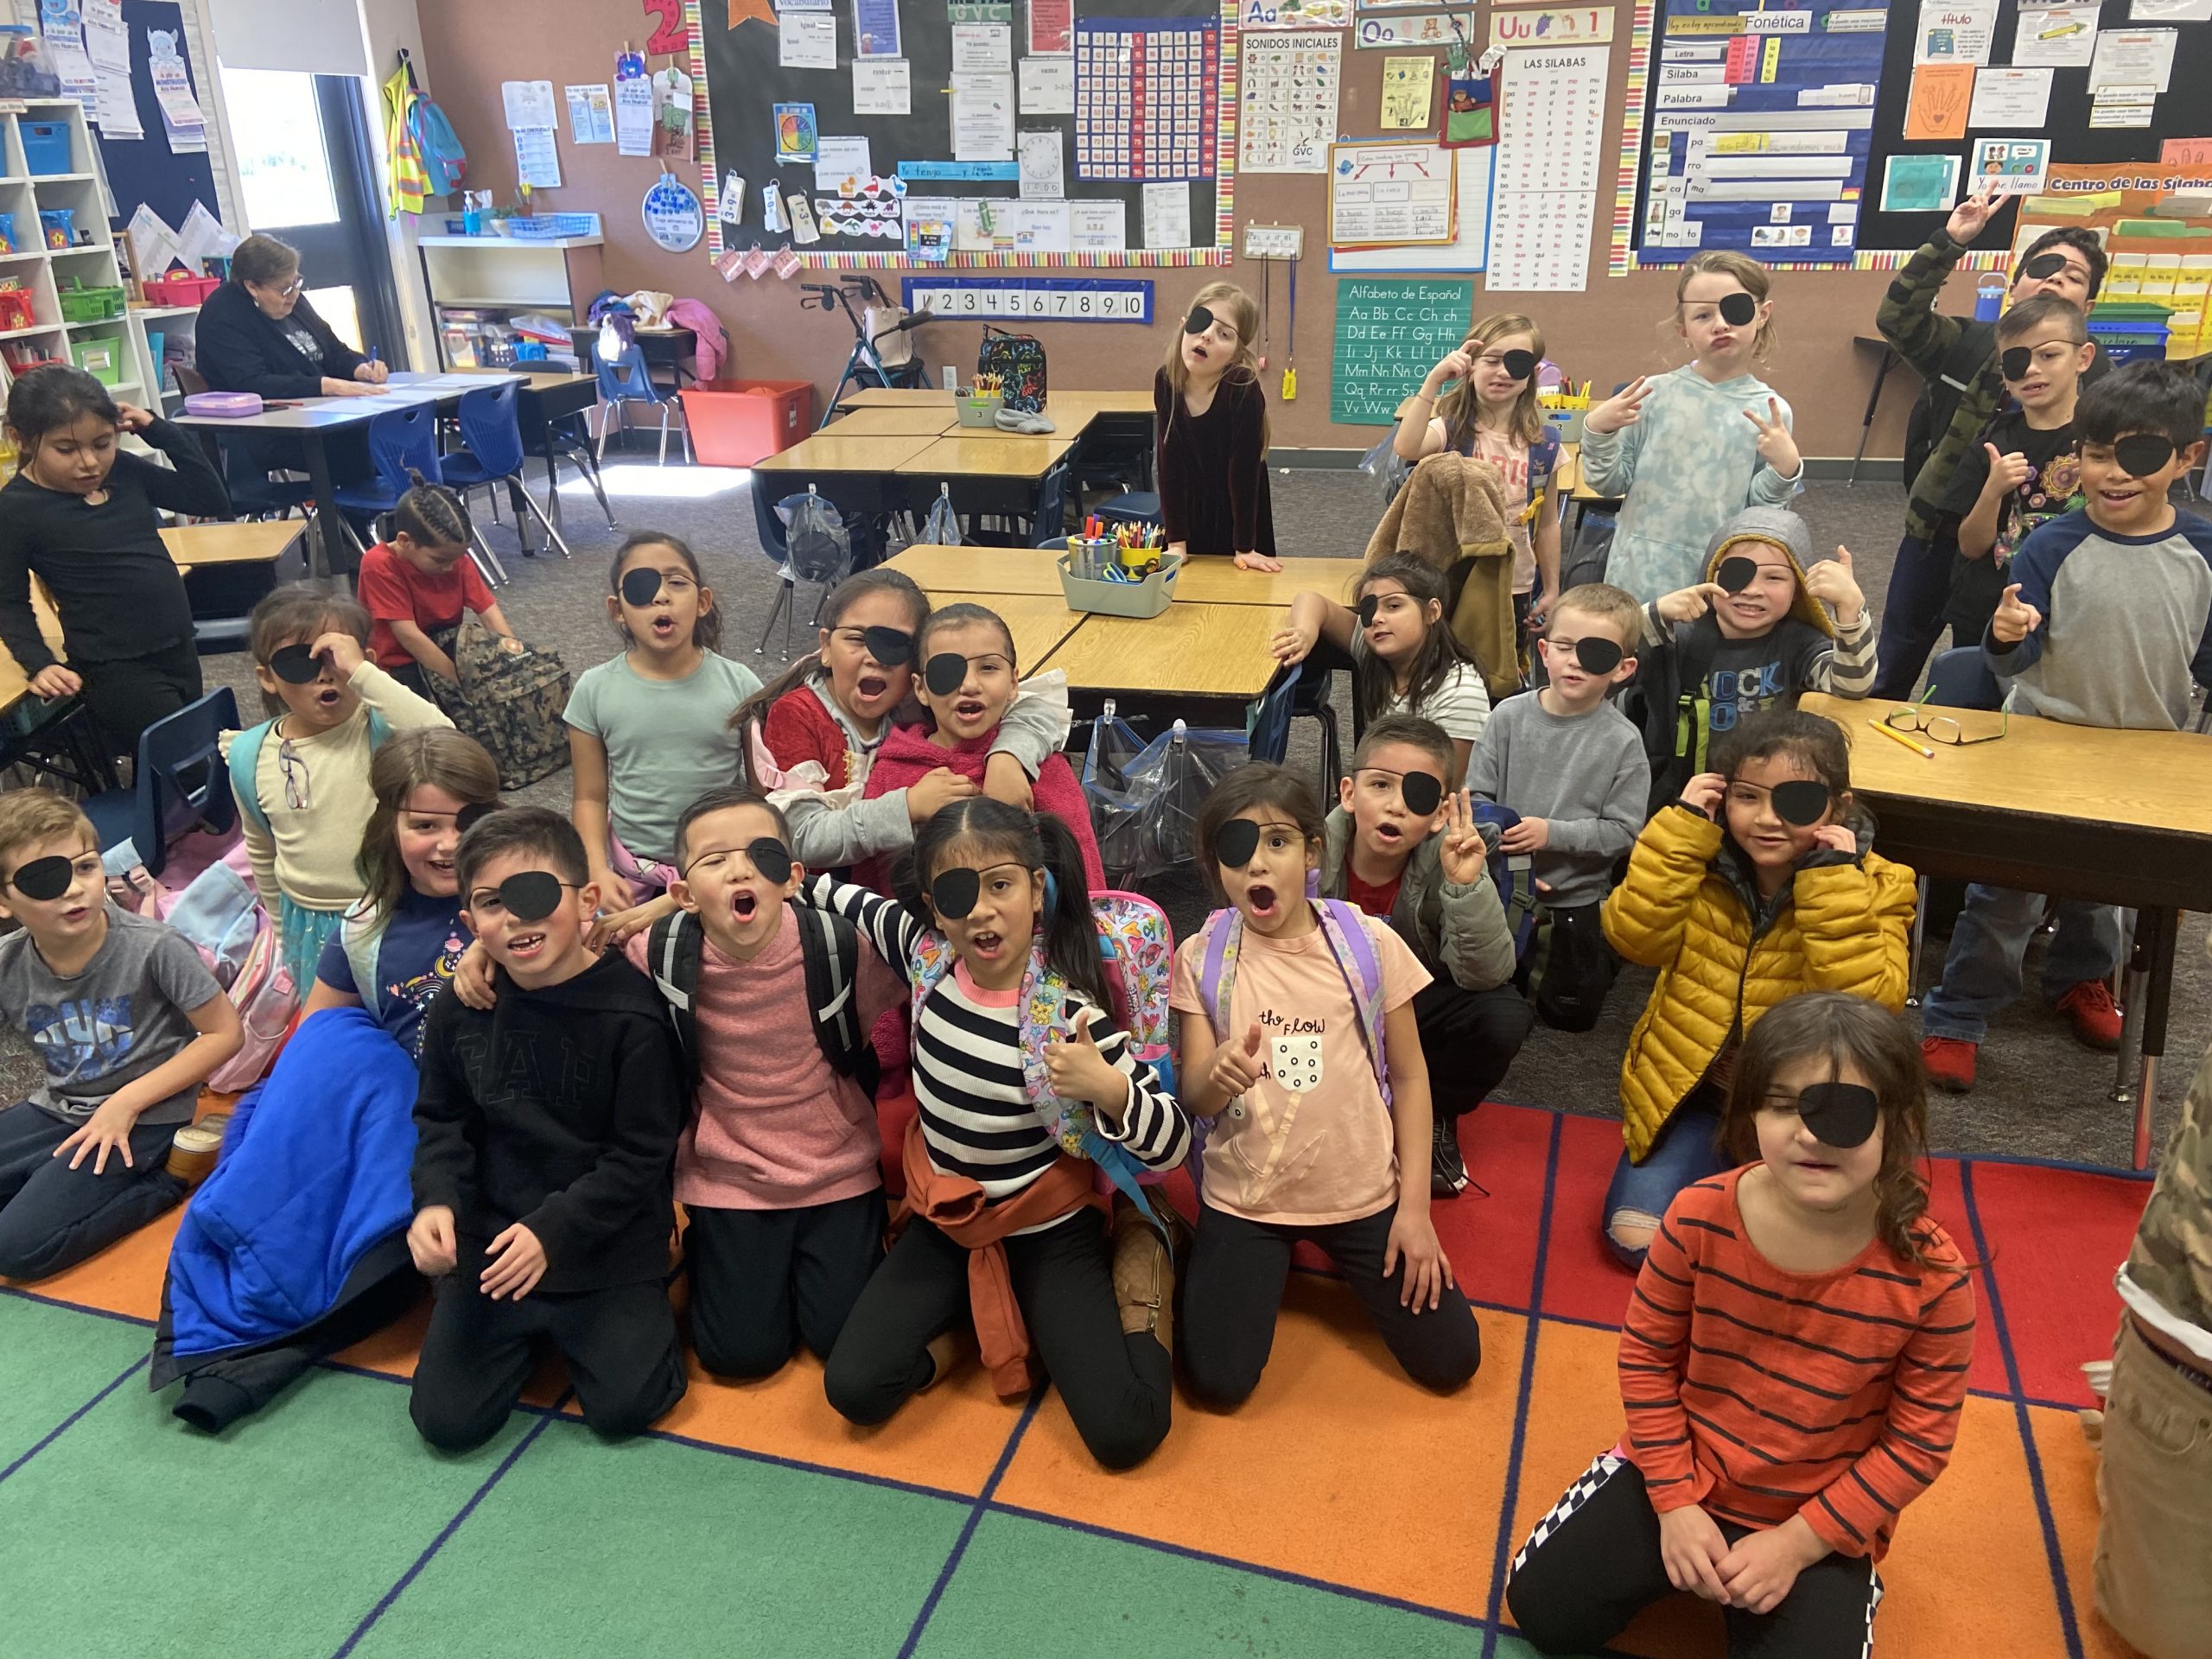 Classroom of students wearing eyepatches for Pirate Day